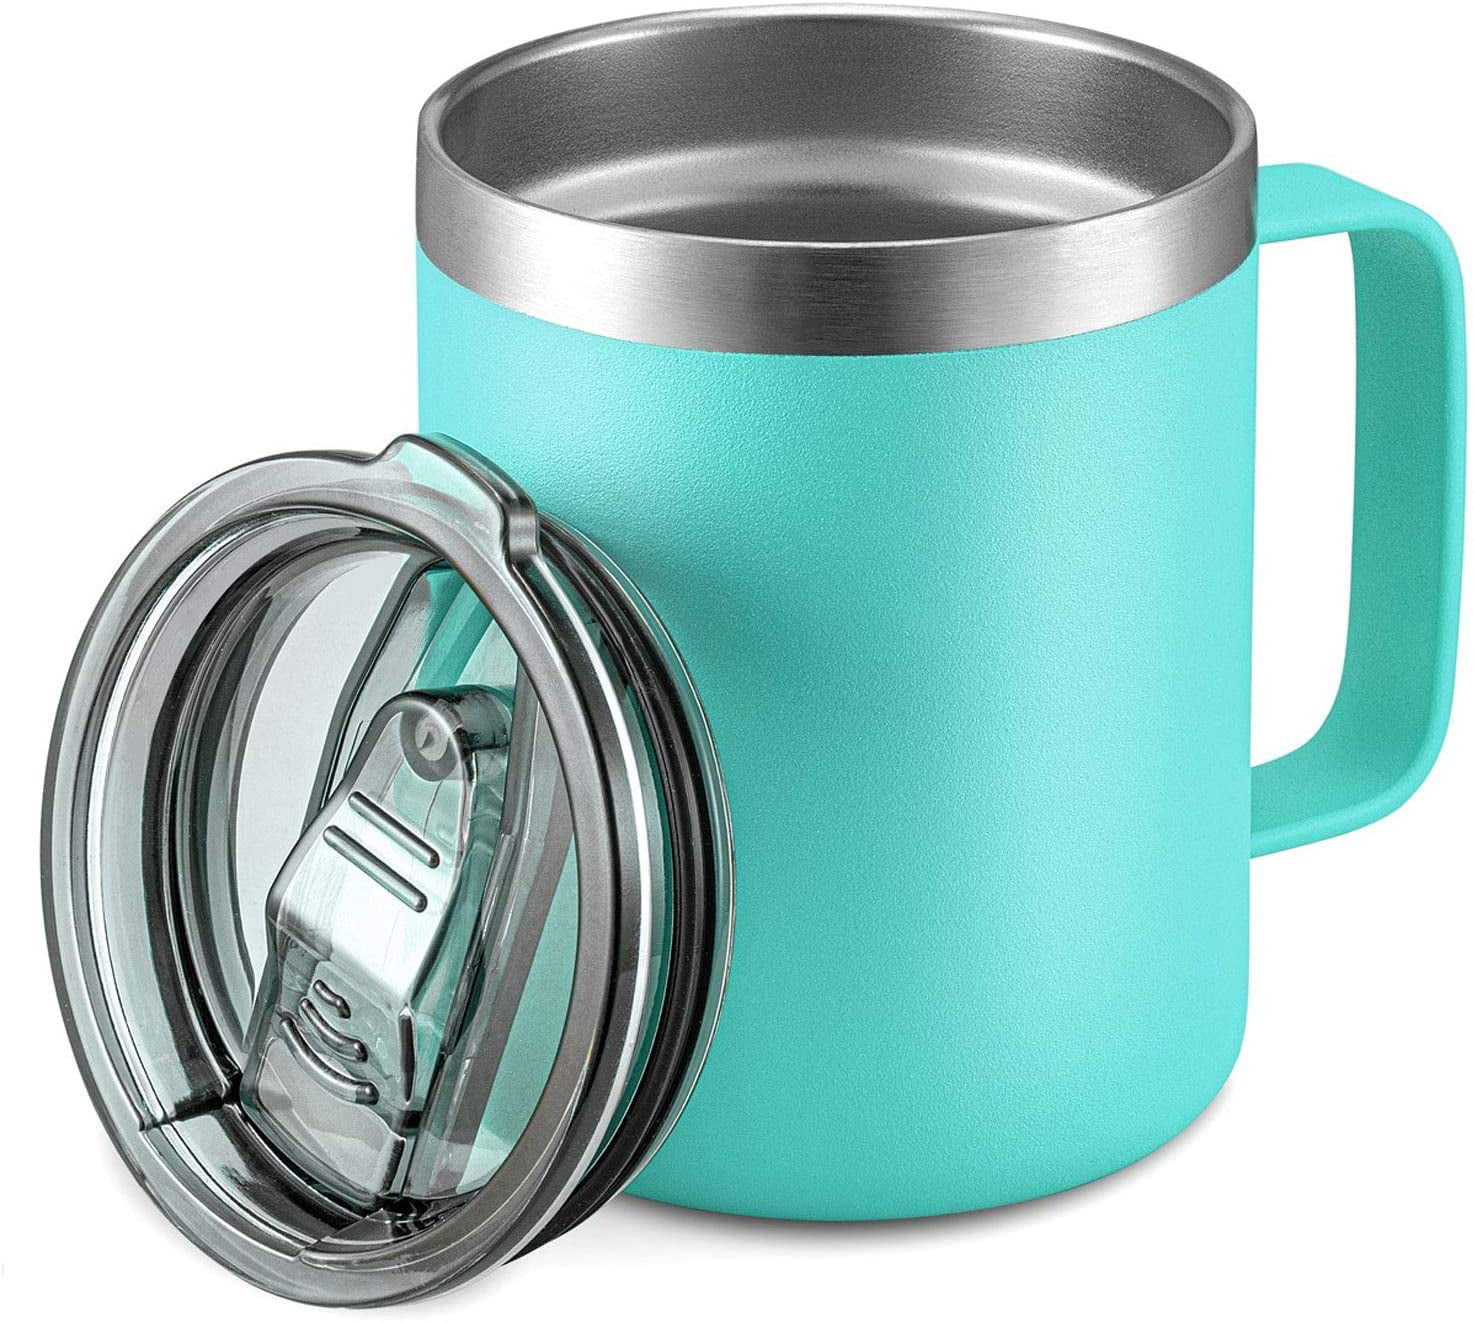 Travel Mug Travel Cup Double Wall Insulated Sealing Soup Cup Coffee Mug Water Business Home Portable